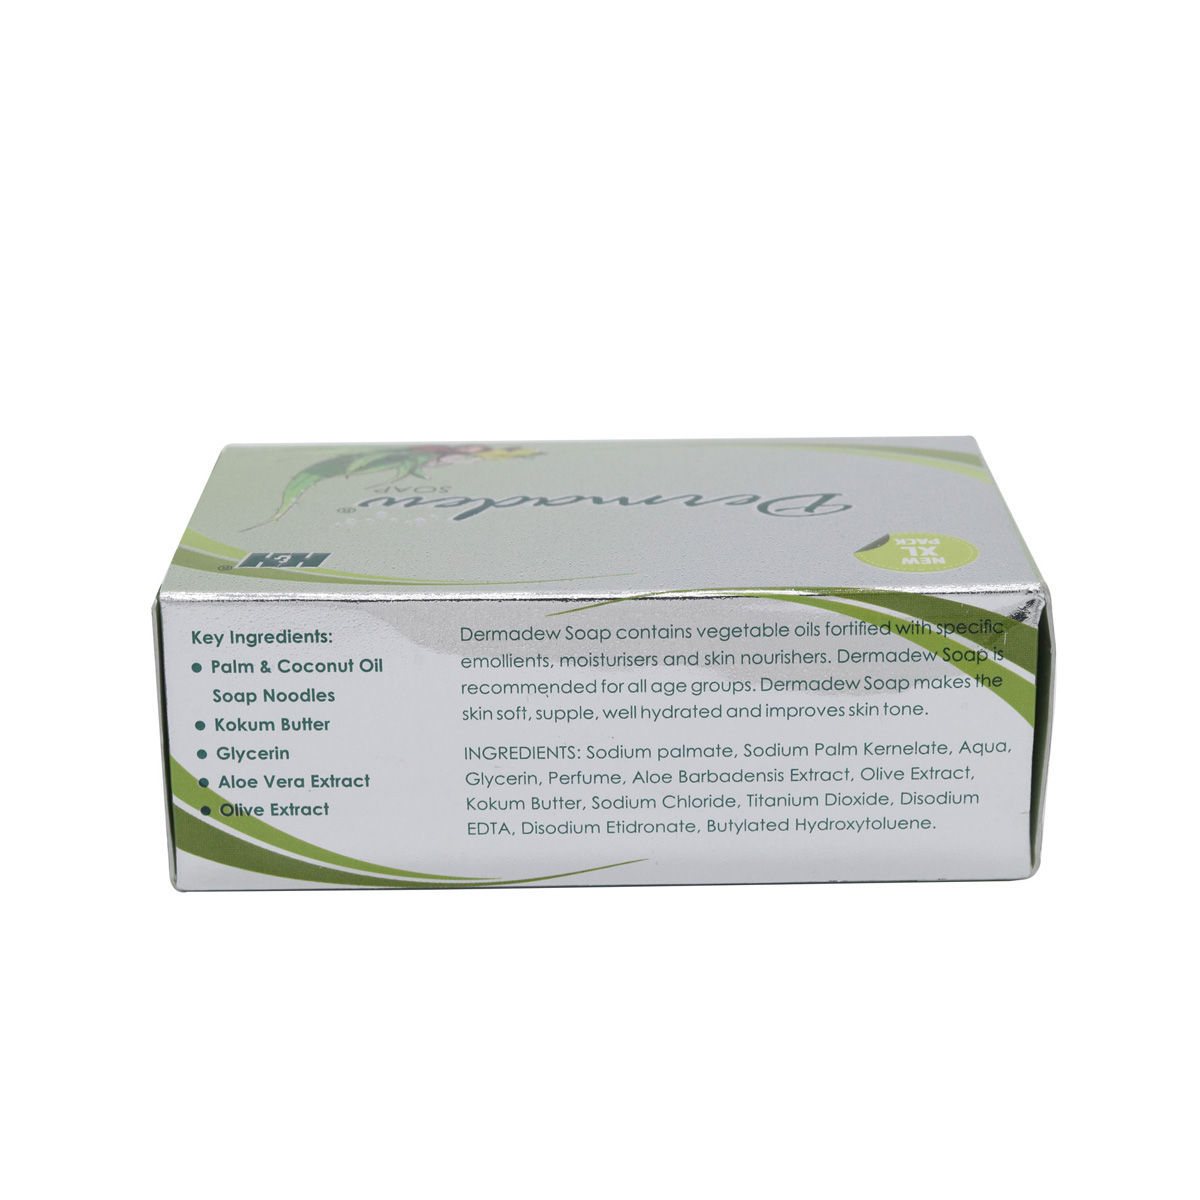 Dermadew Soap, 125 gm Price, Uses, Side Effects, Composition - Apollo ...